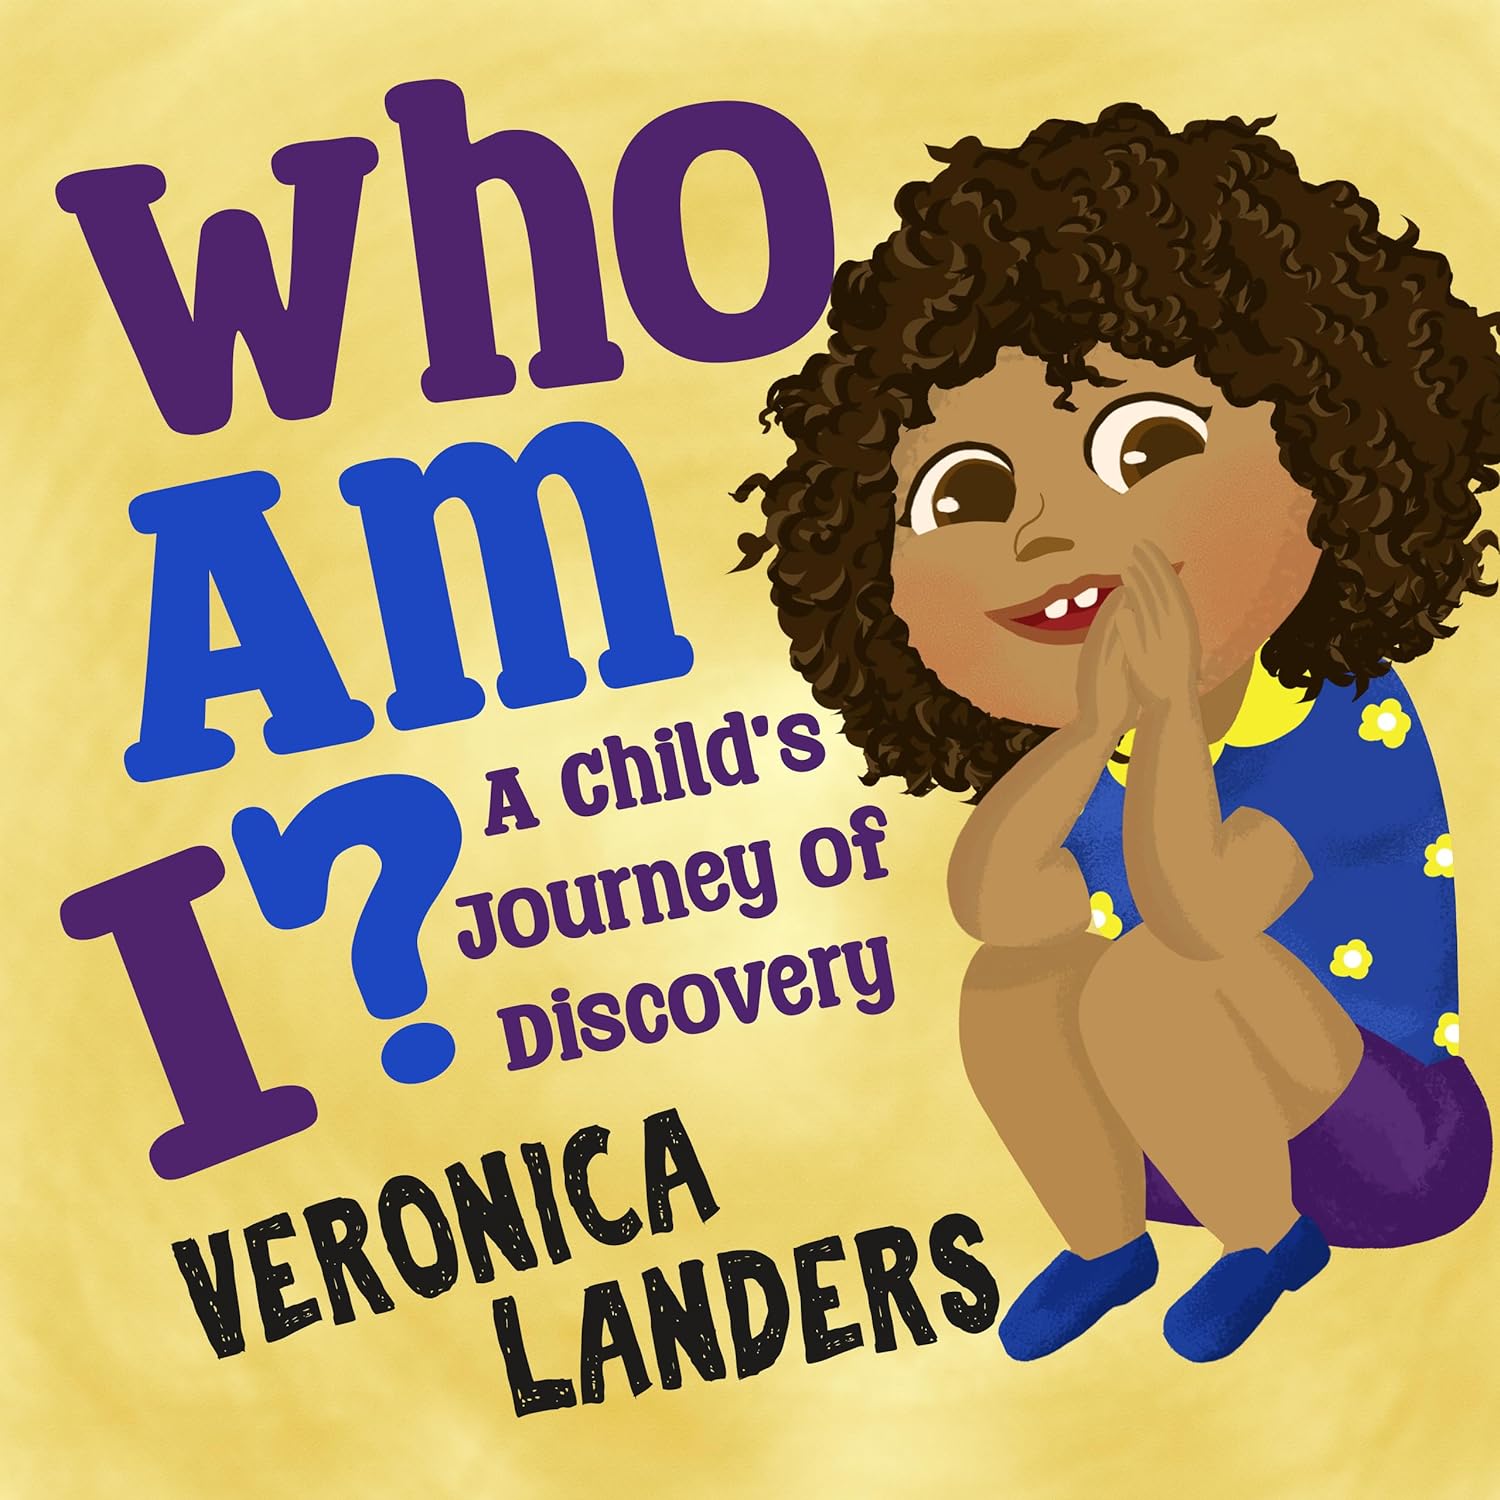 New children’s book "Who Am I?" by Veronica Landers is released, an endearing story of self-discovery that teaches kids to embrace their unique qualities